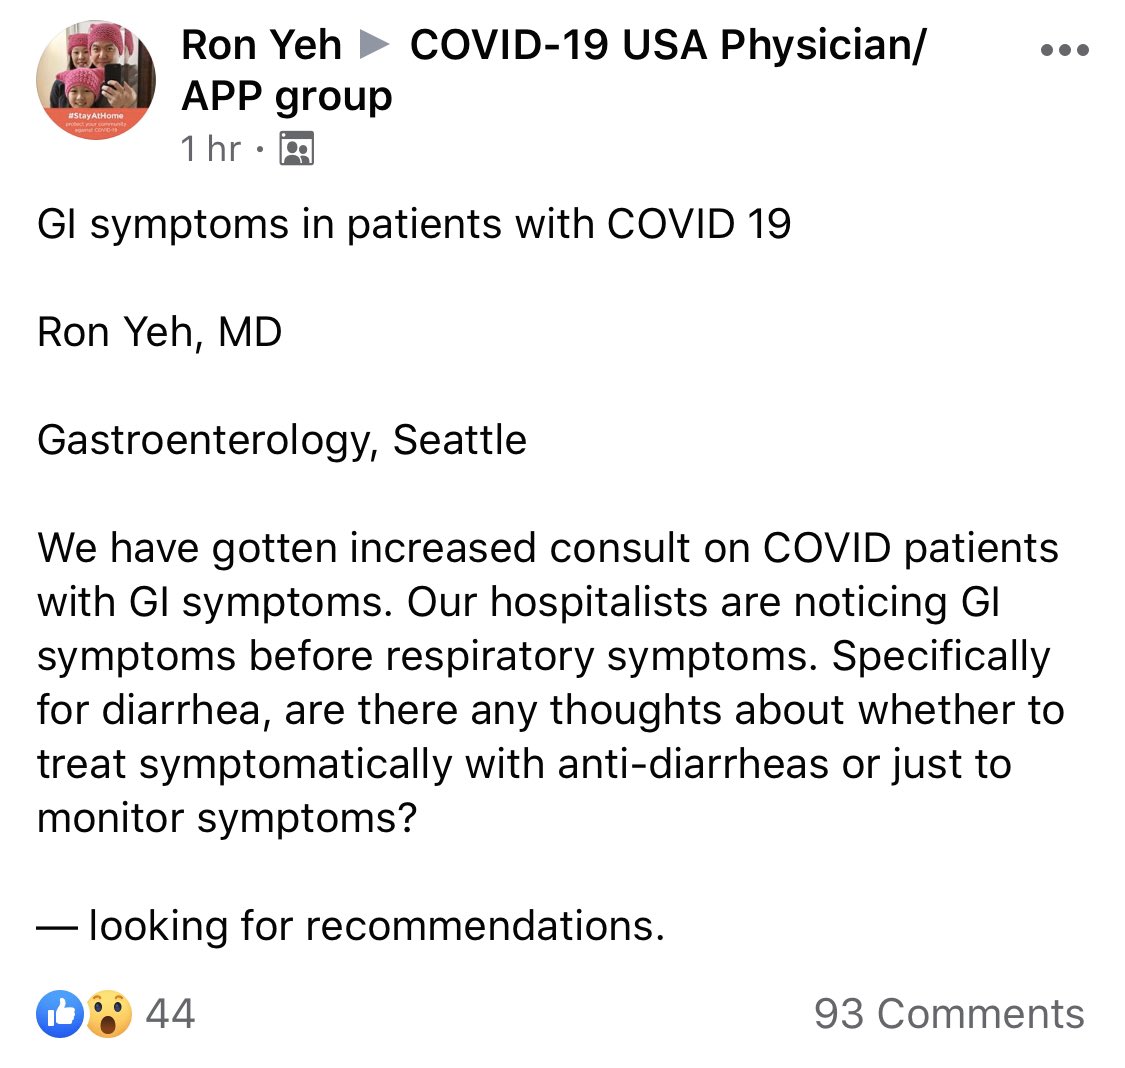 Has anyone else come across this as well, specifically with pushback for testing with a high suspicion as these patients don’t specifically meet CDC screening guidelines? @SWexner @medicalaxioms #covid4MDs